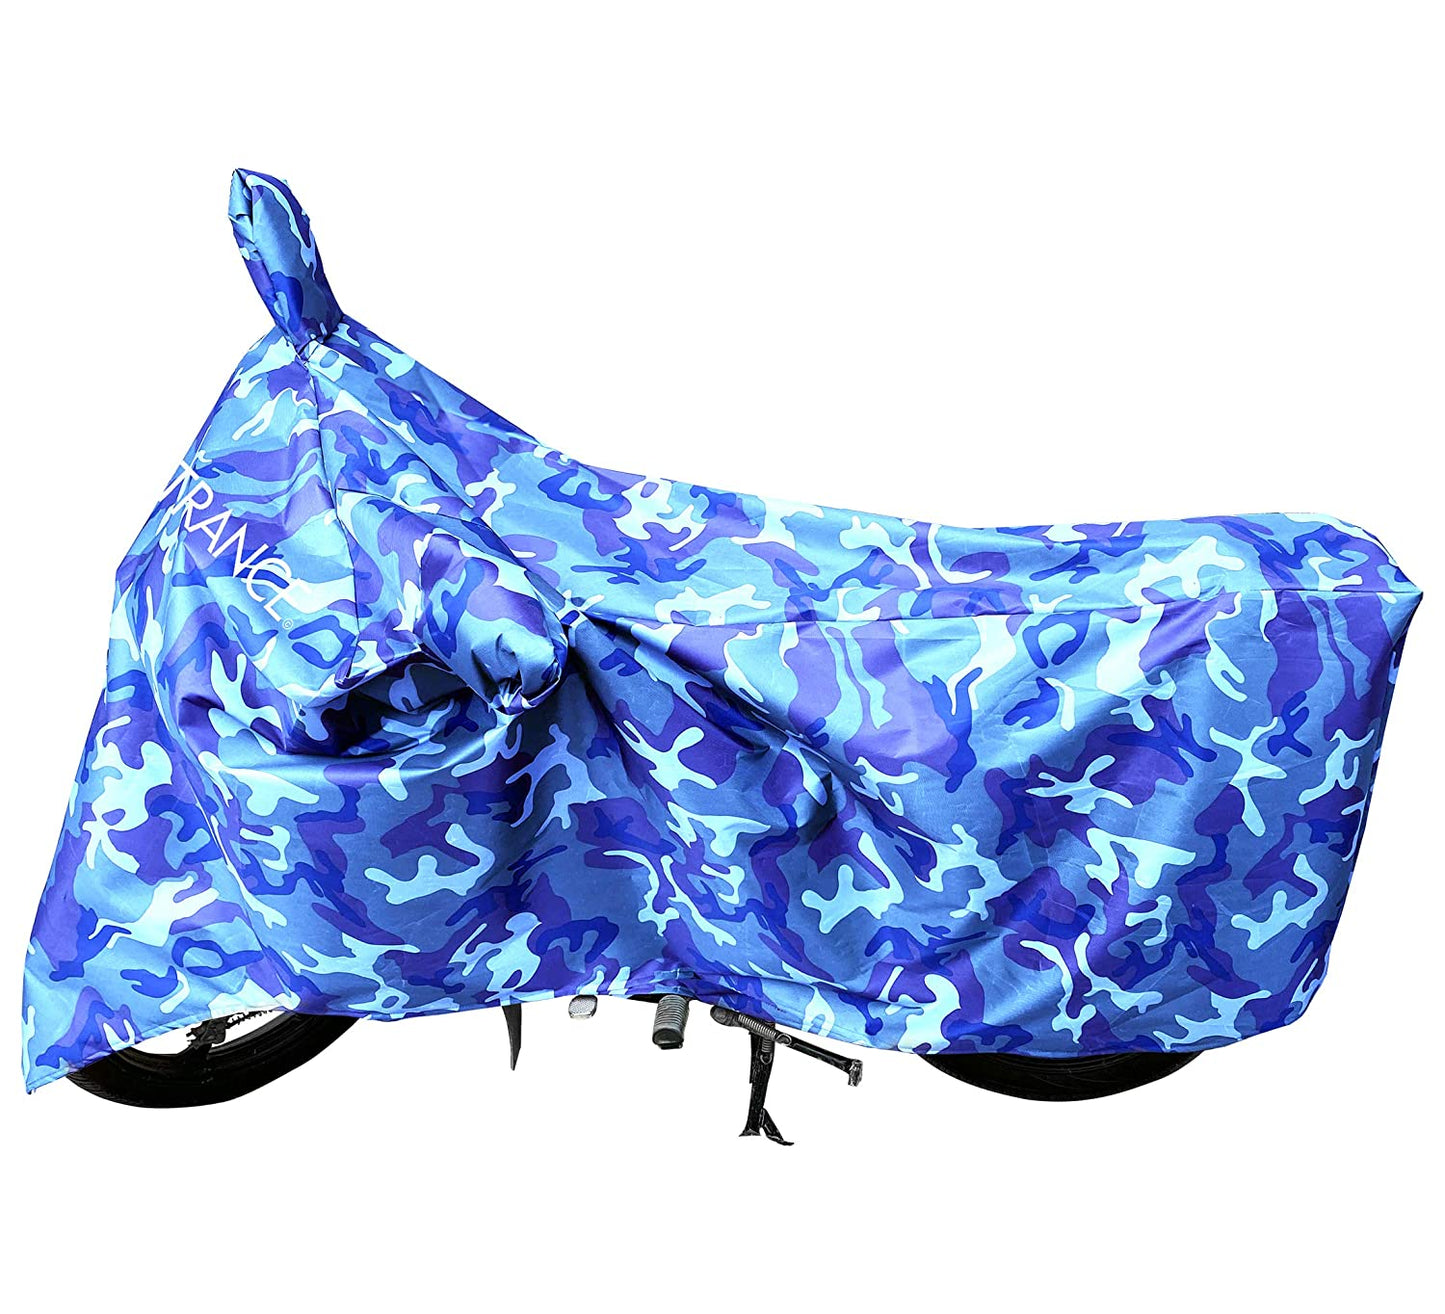 MotoTrance Jungle Bike Body Covers For Suzuki Zeus - Interlock-Stitched Waterproof and Heat Resistant with Mirror Pockets